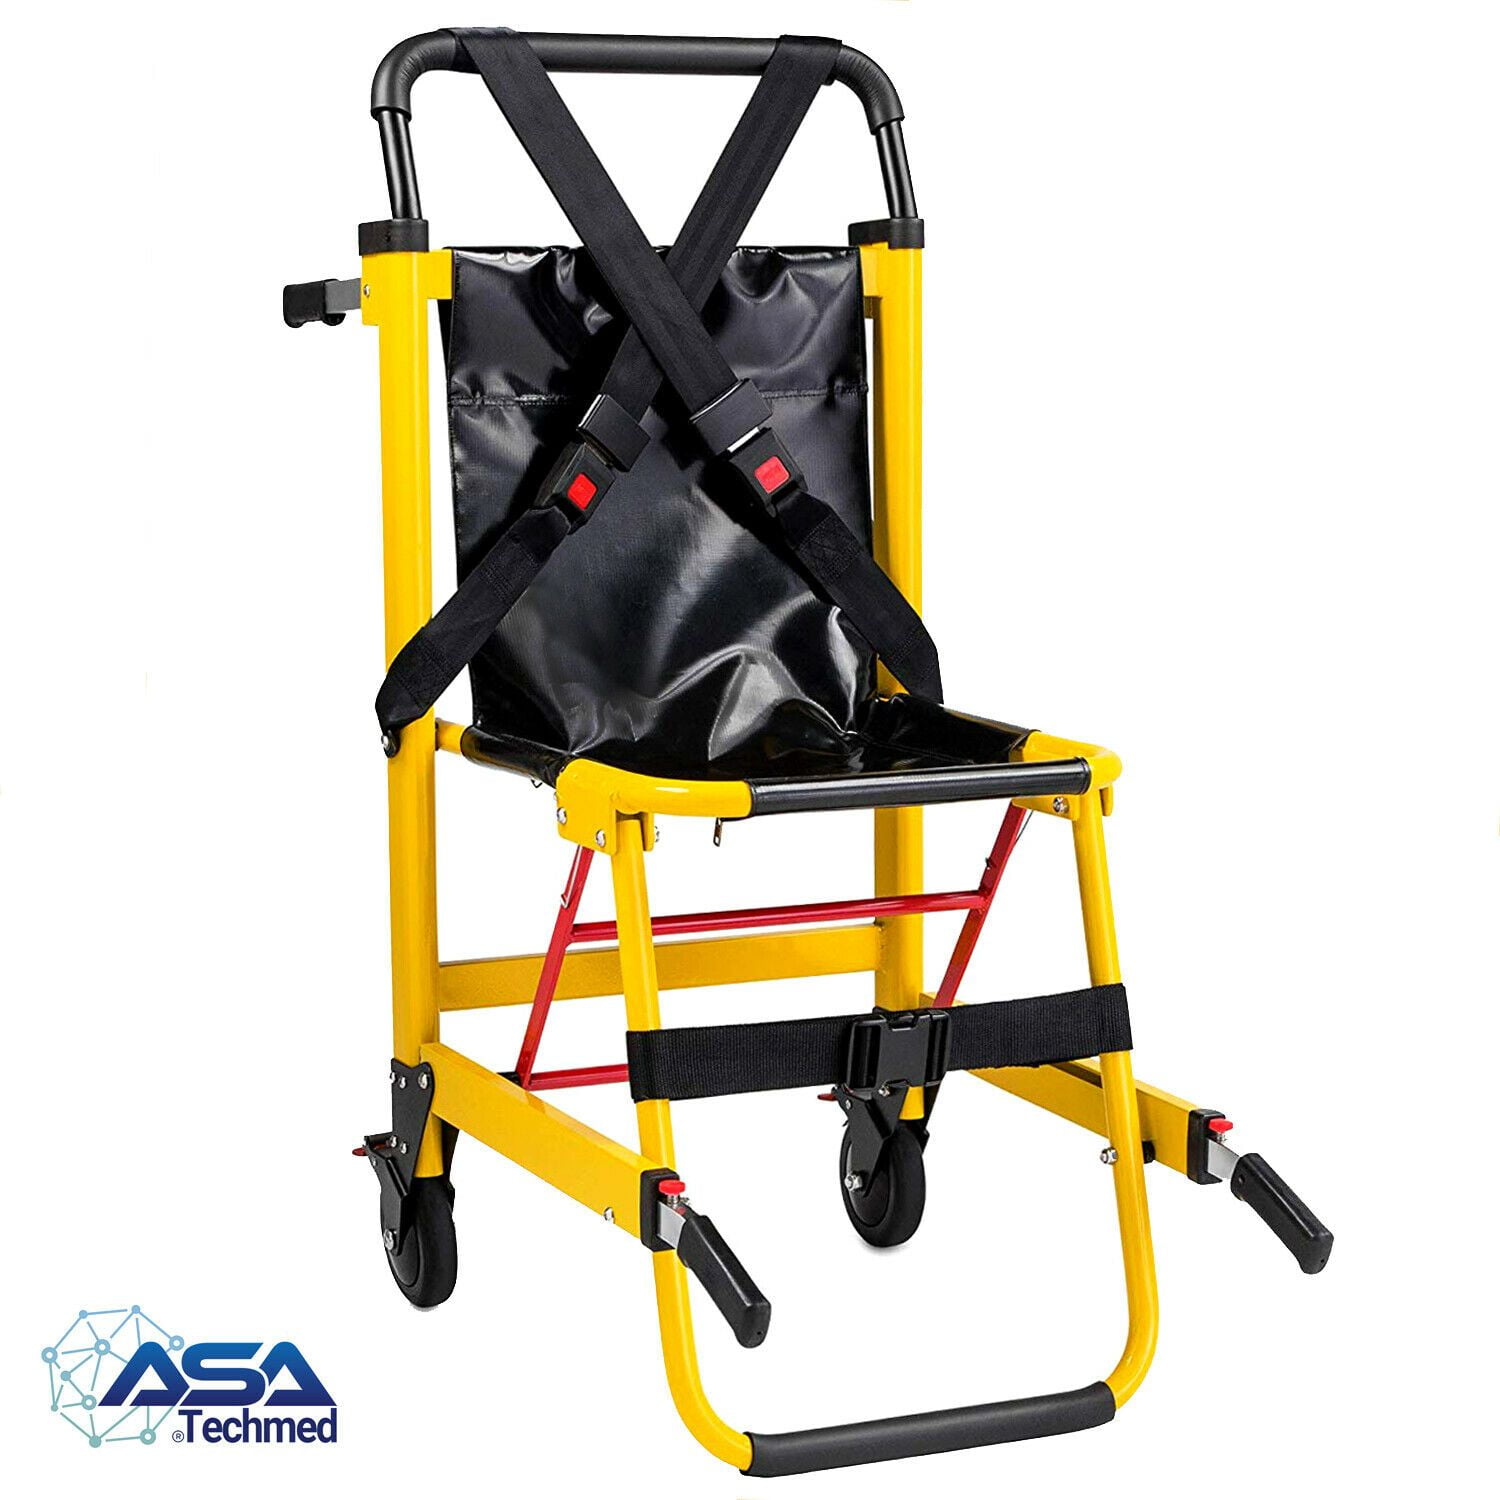 Ambulance Firefighter Evacuation Medical Foldable Aluminum Lift Stair Chair 2 Wheel Blue EMS Medical Stair Stretcher Chair 3 Adjustable Straps with Quick Release Buckles 